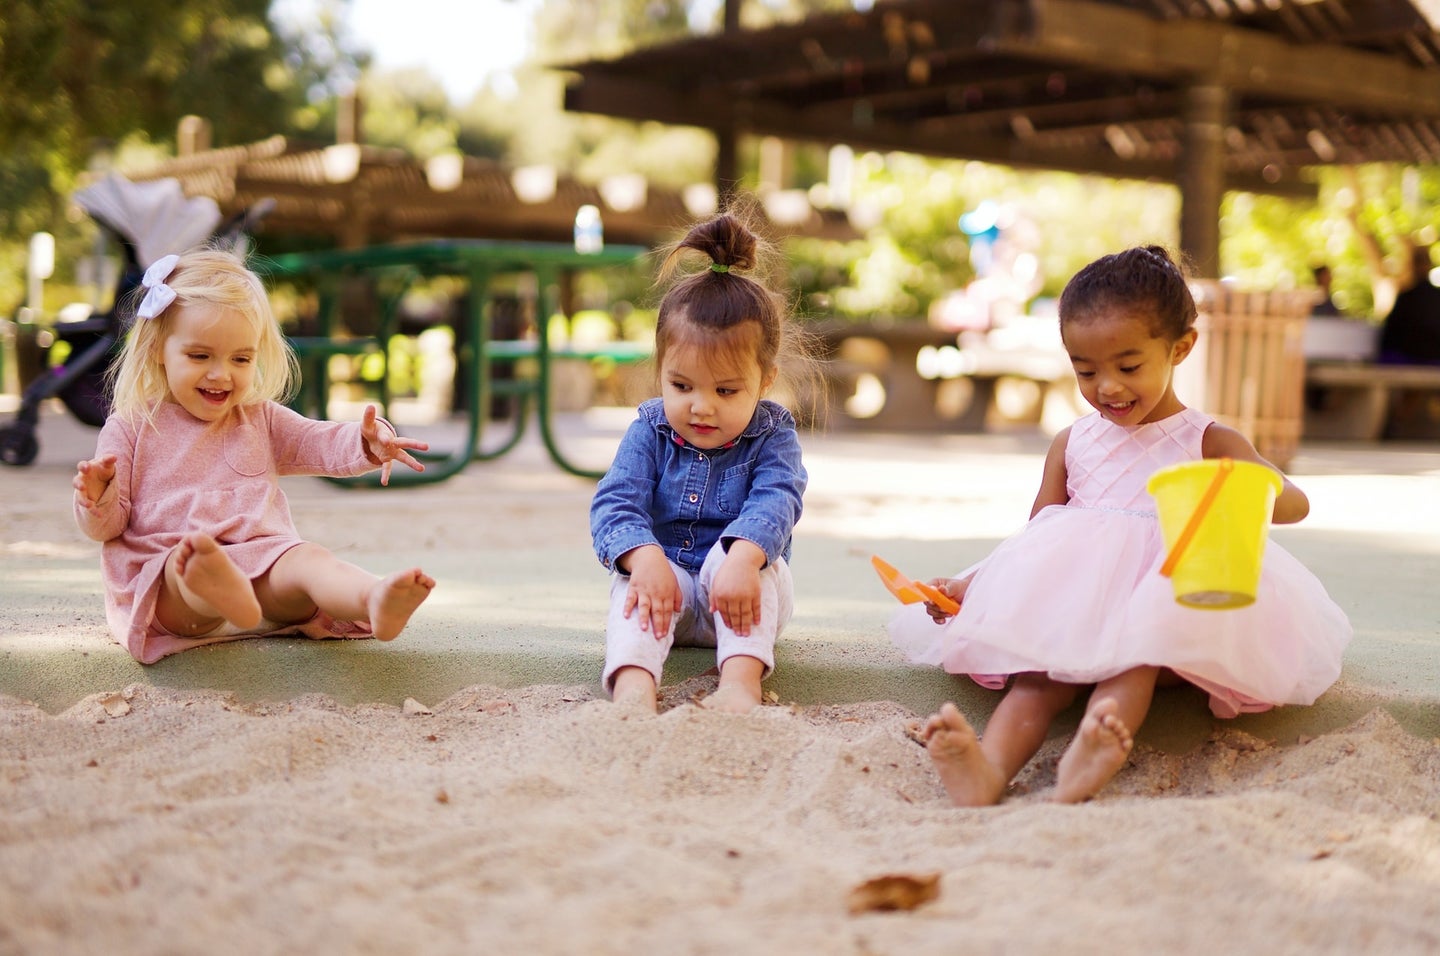 Three children in dresses playing in a sandbox during an acute hepatitis outbreak in the US and Europe